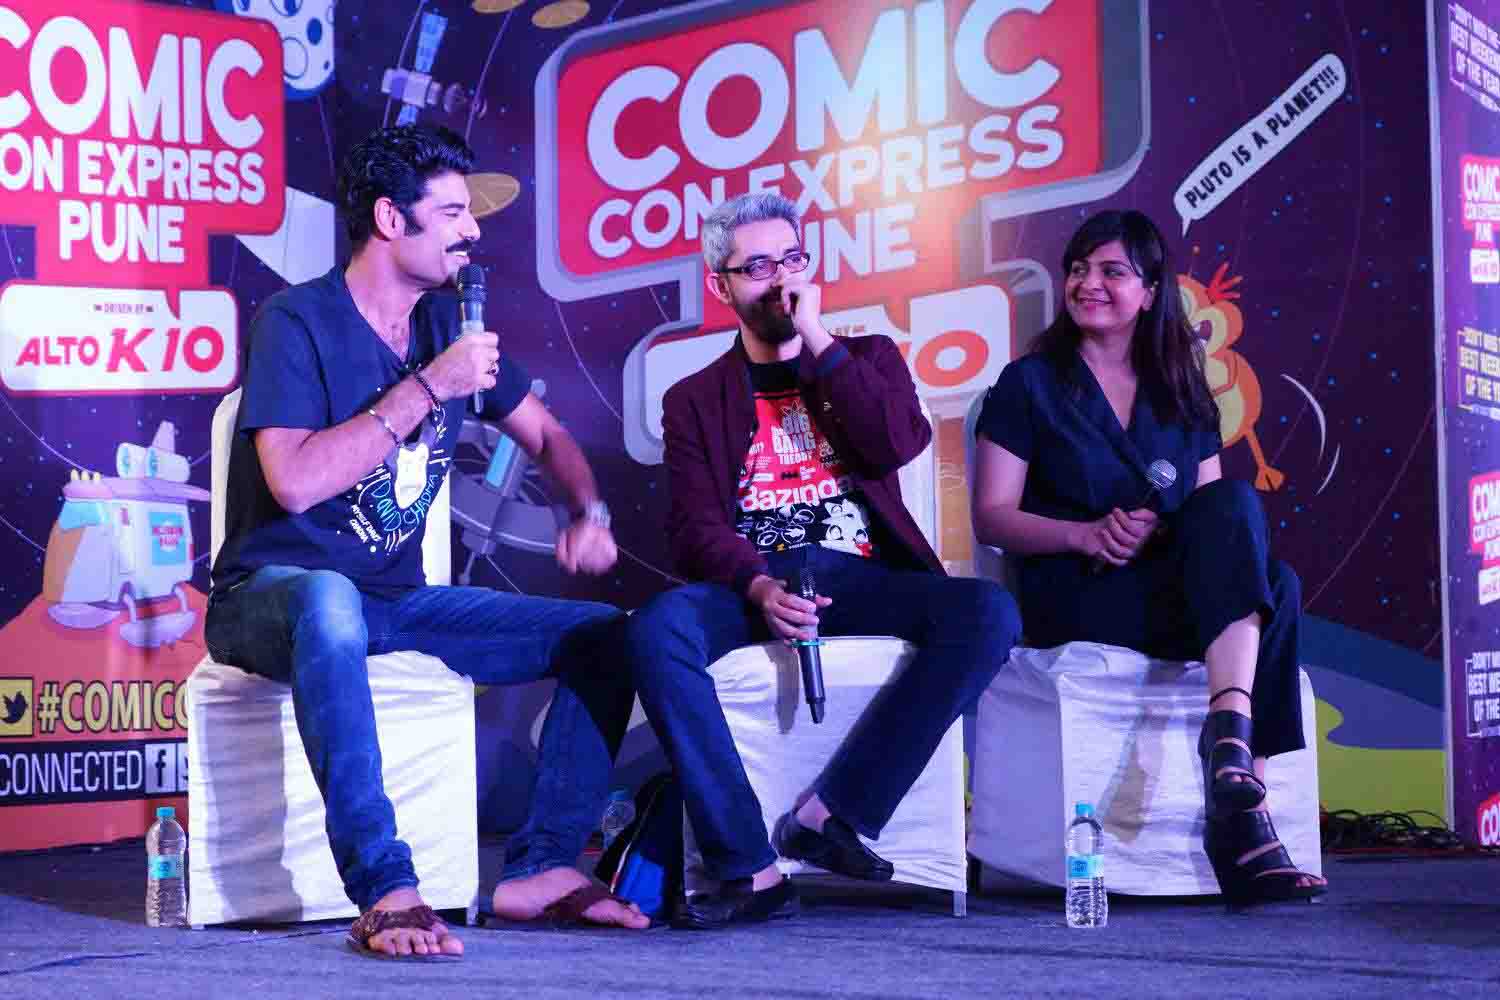 comic con express pune events pune